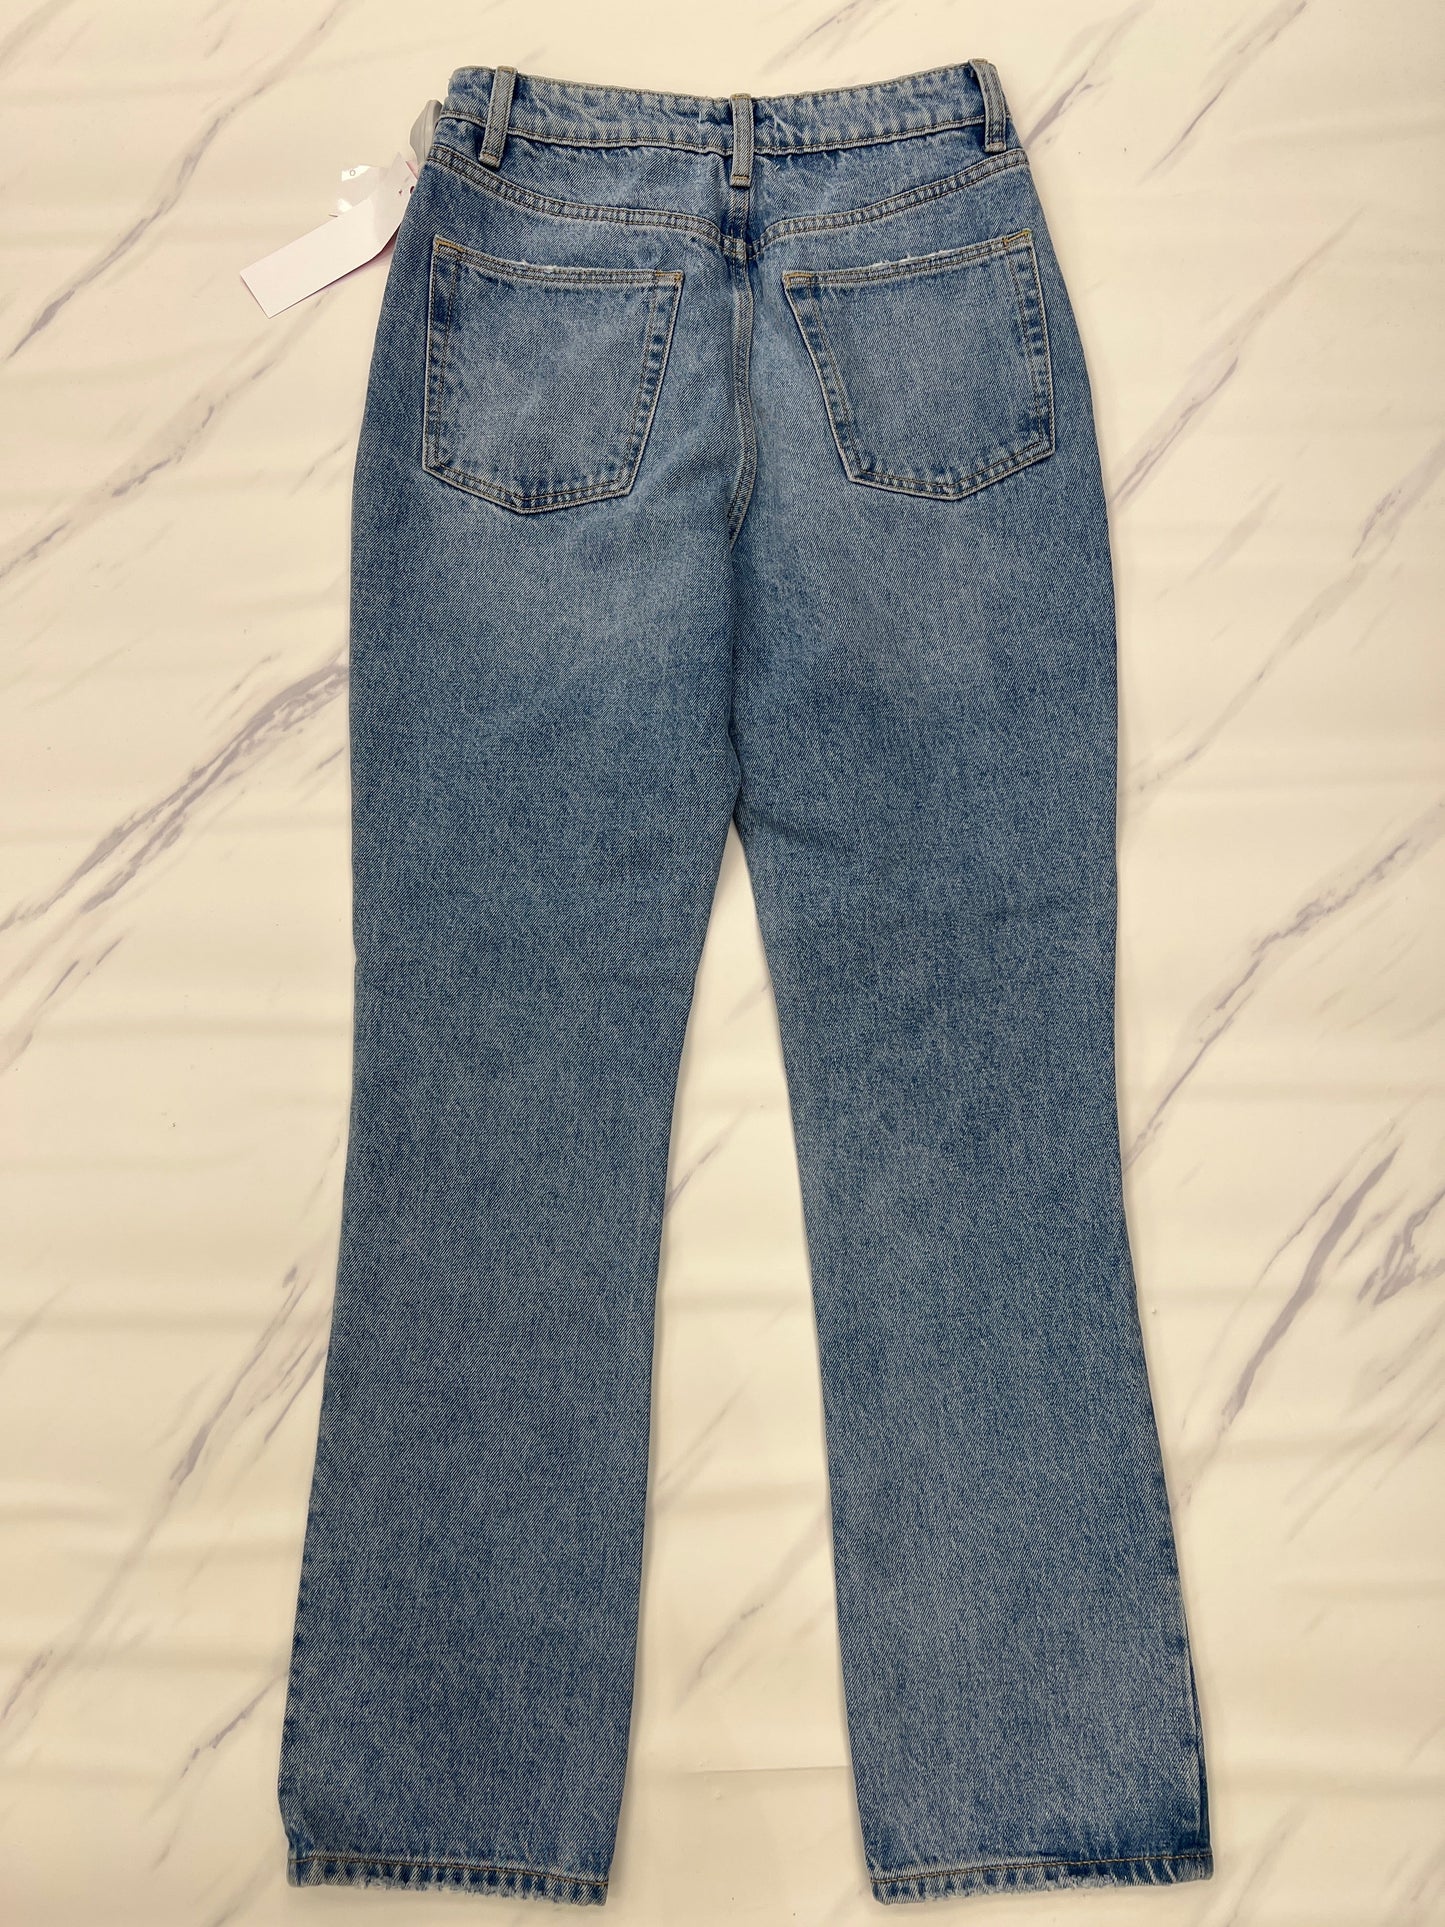 Jeans Straight Lovers & Friends, Size 0